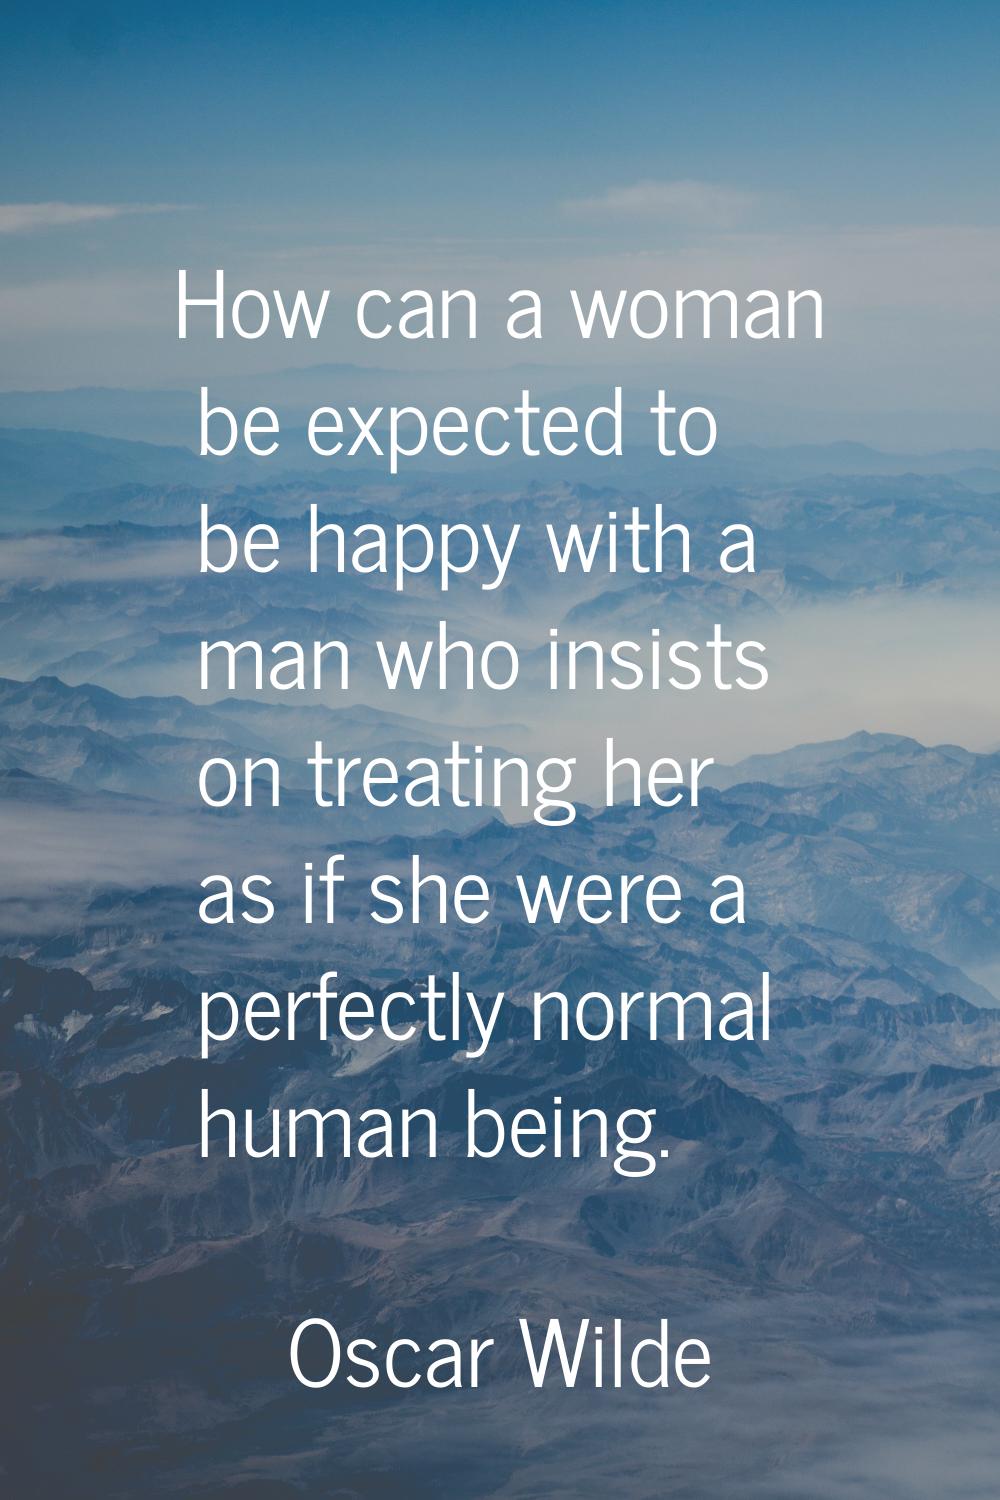 How can a woman be expected to be happy with a man who insists on treating her as if she were a per